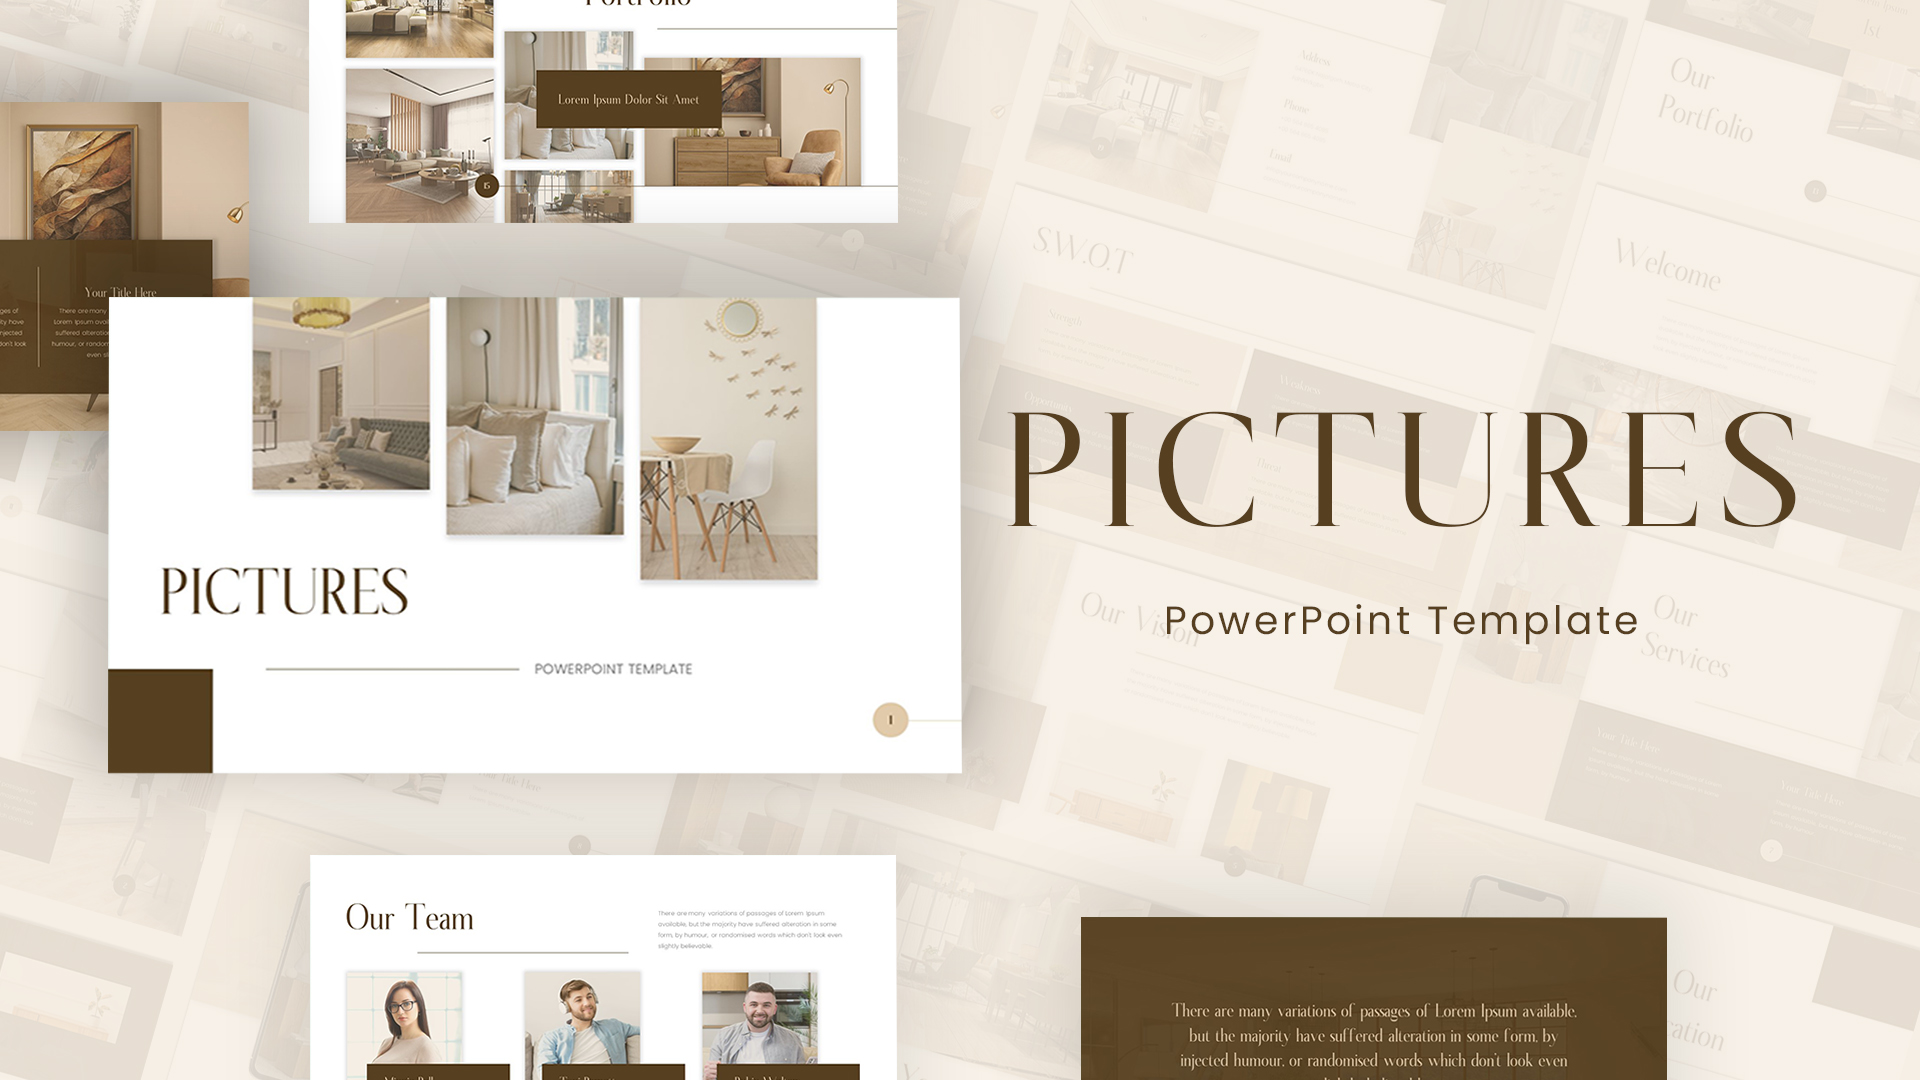 PowerPoint Template With Pictures